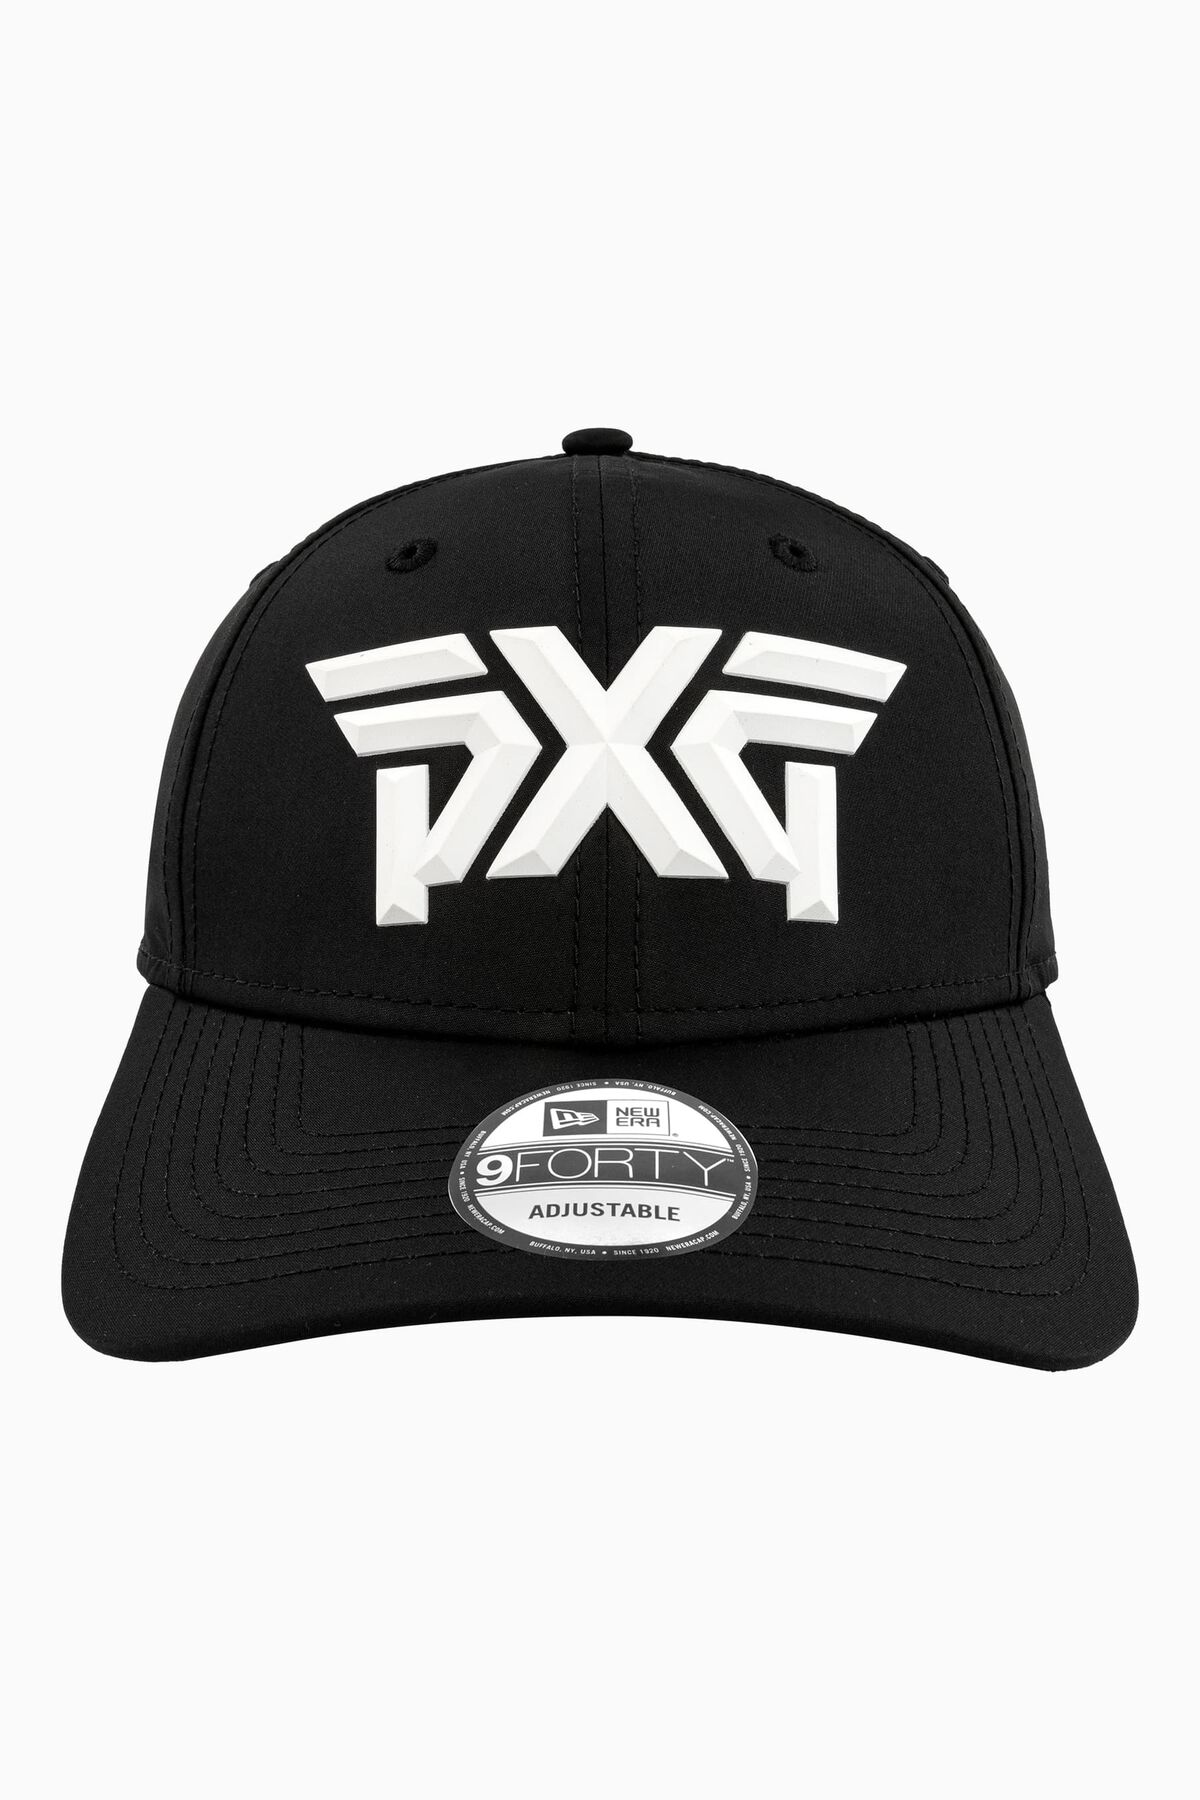 Lumberjack Dog Ear 59FIFTY Fitted Cap  Shop the Highest Quality Golf  Apparel, Gear, Accessories and Golf Clubs at PXG